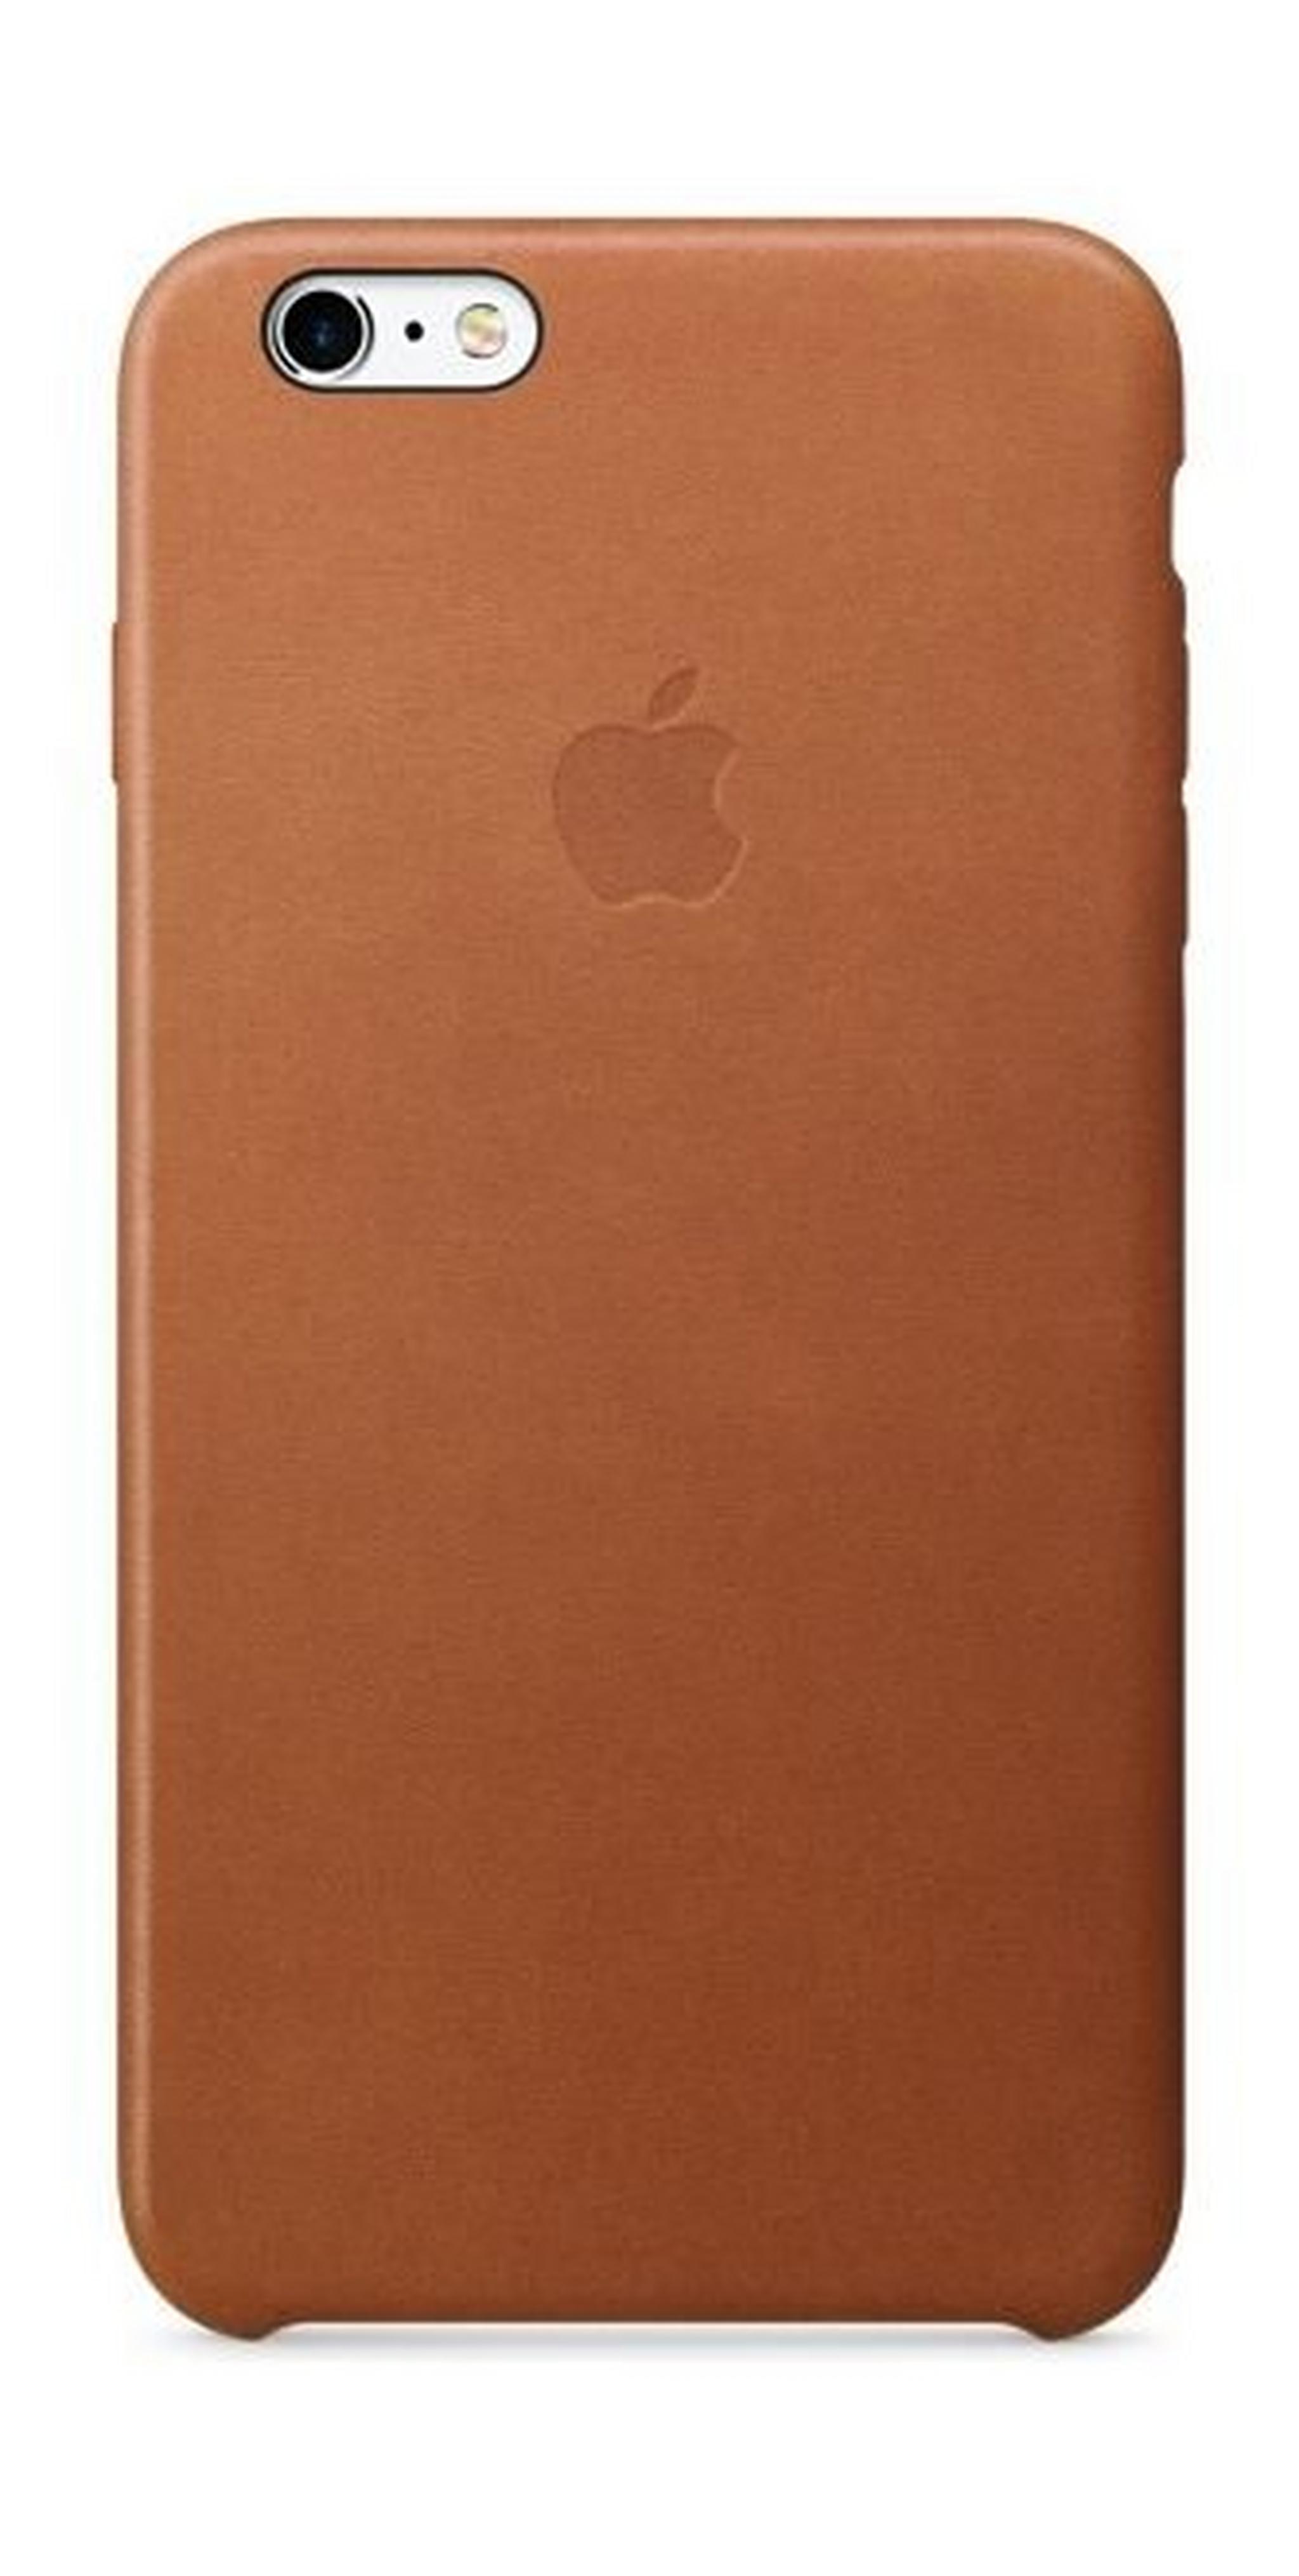 Apple iPhone 6s Leather Case - (MKXT2ZM/A) Saddle Brown